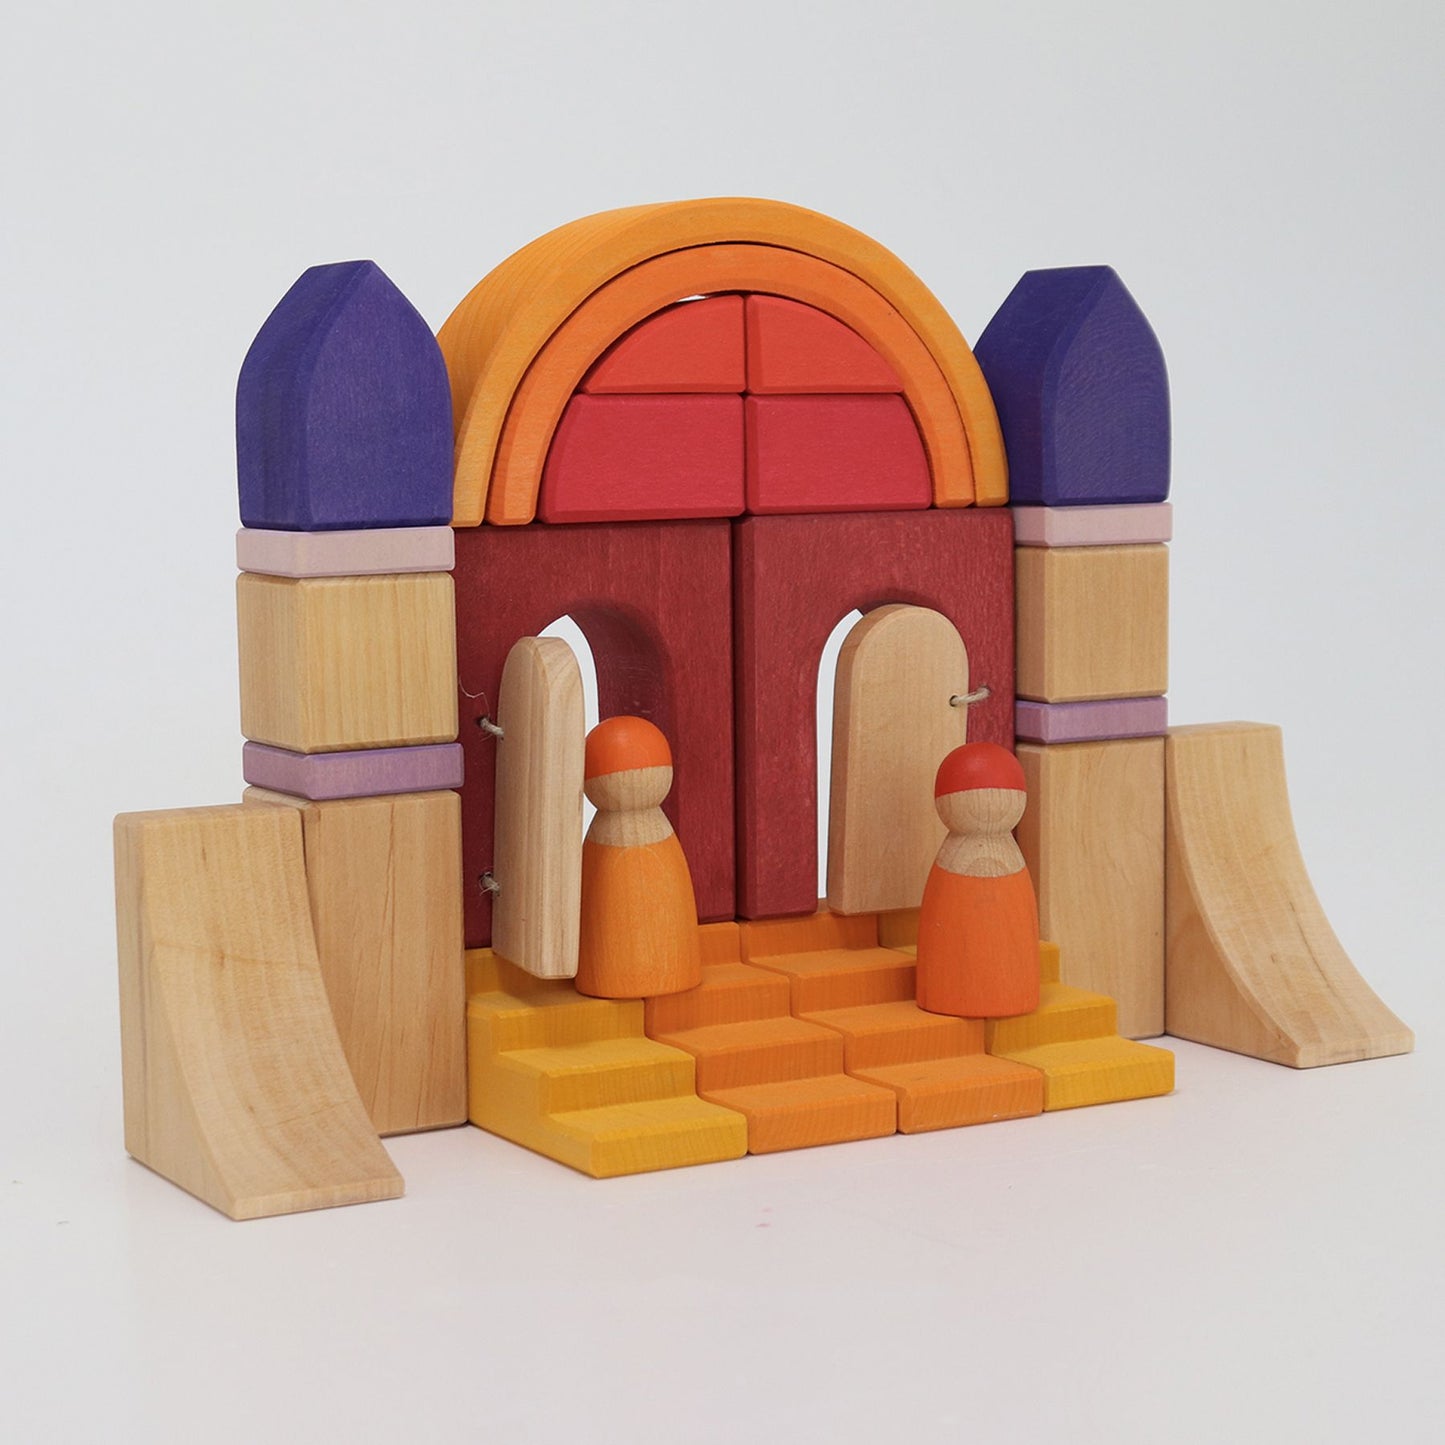 Building World Desert Sand | Small World Playset | Wooden Toys for Kids | Open-Ended Play